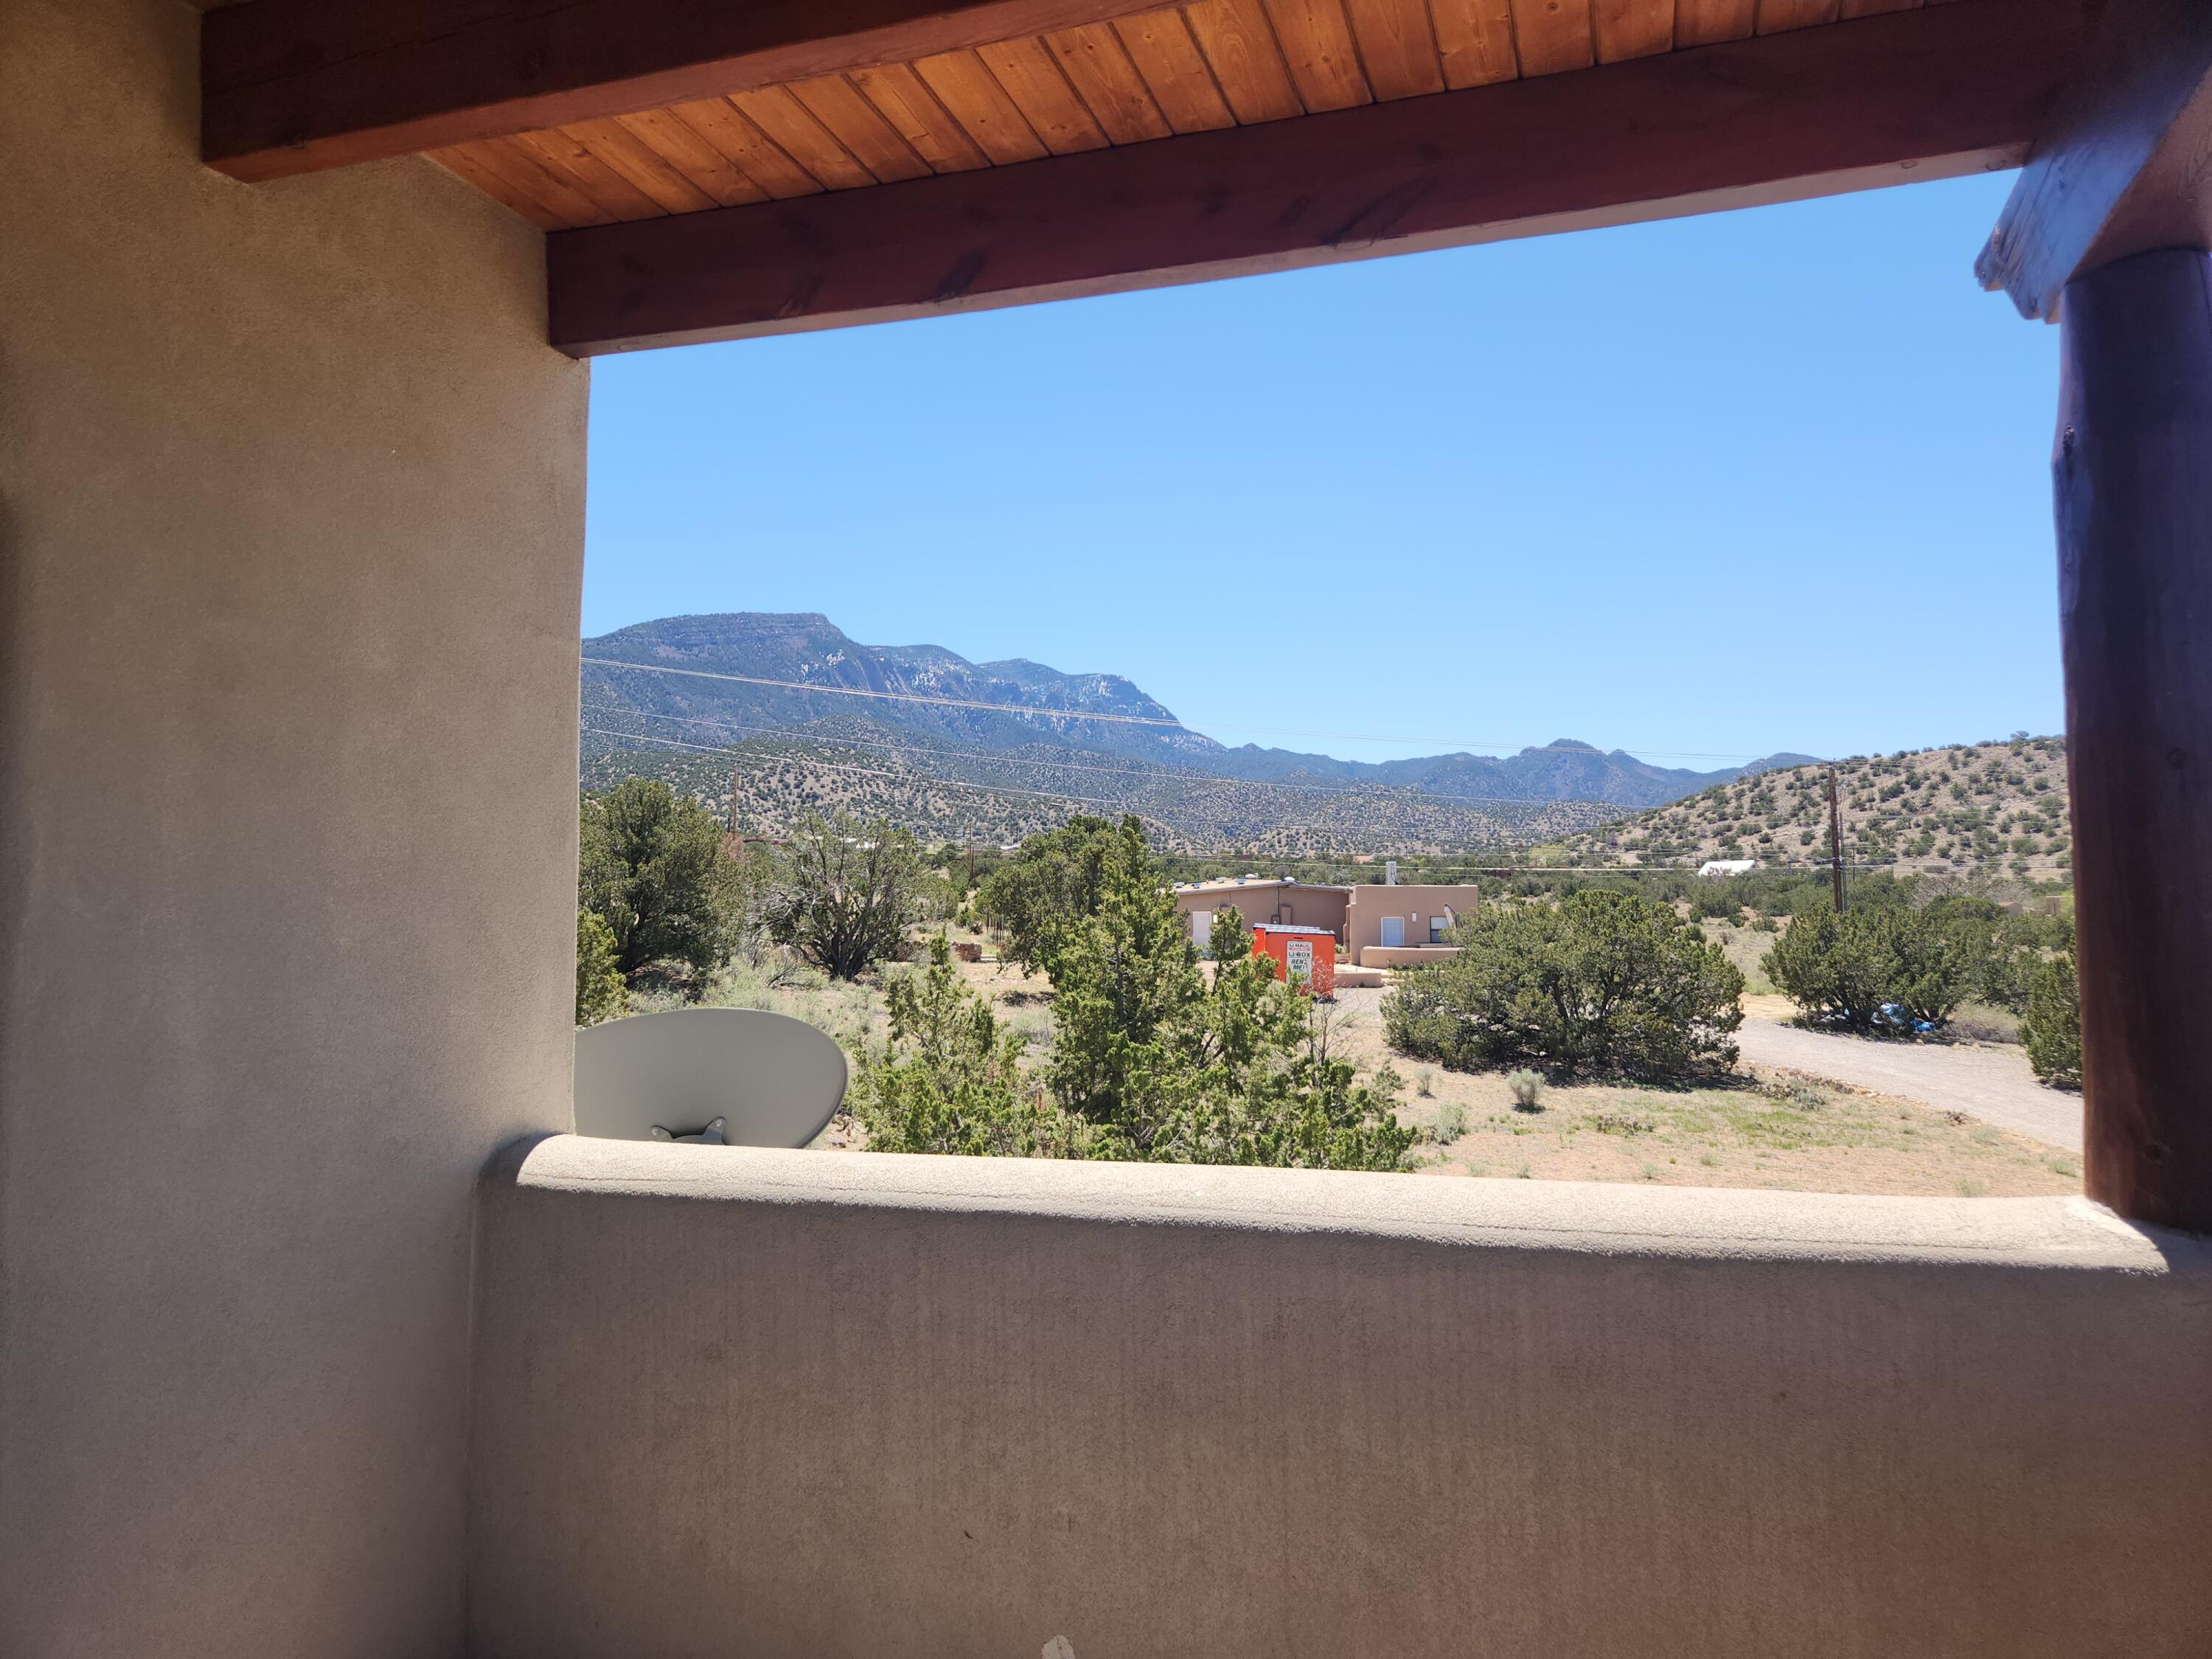 2 Hillside Drive, Placitas, New Mexico 87043, 4 Bedrooms Bedrooms, ,3 BathroomsBathrooms,Residential,For Sale,2 Hillside Drive,1060948